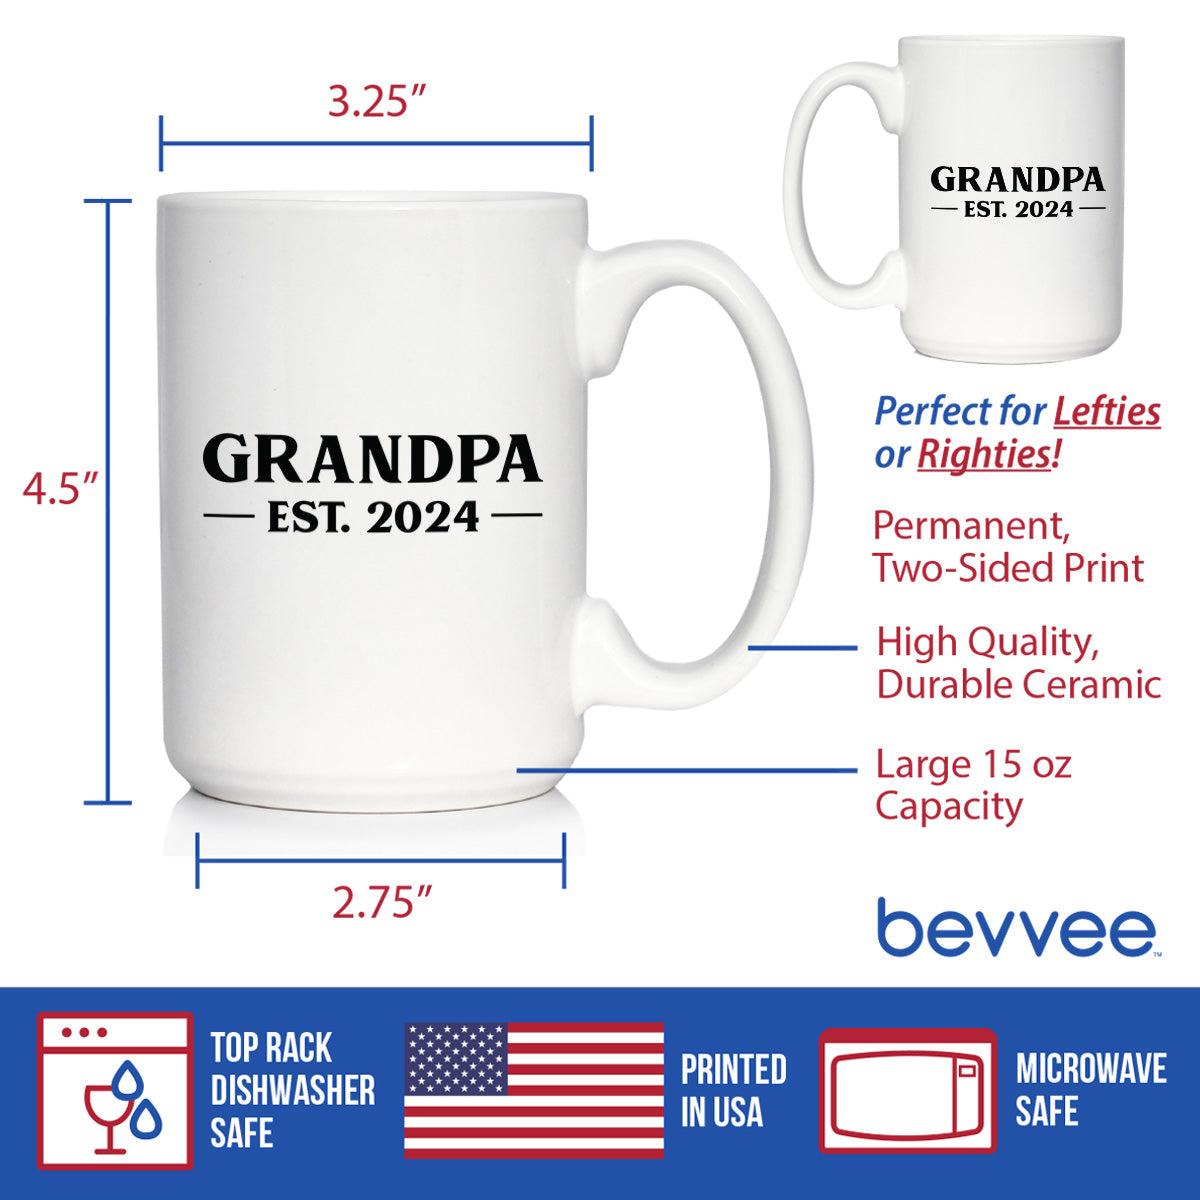 Grandpa Est 2024 - New Grandfather Coffee Mug Gift for First Time Grandparents - Bold